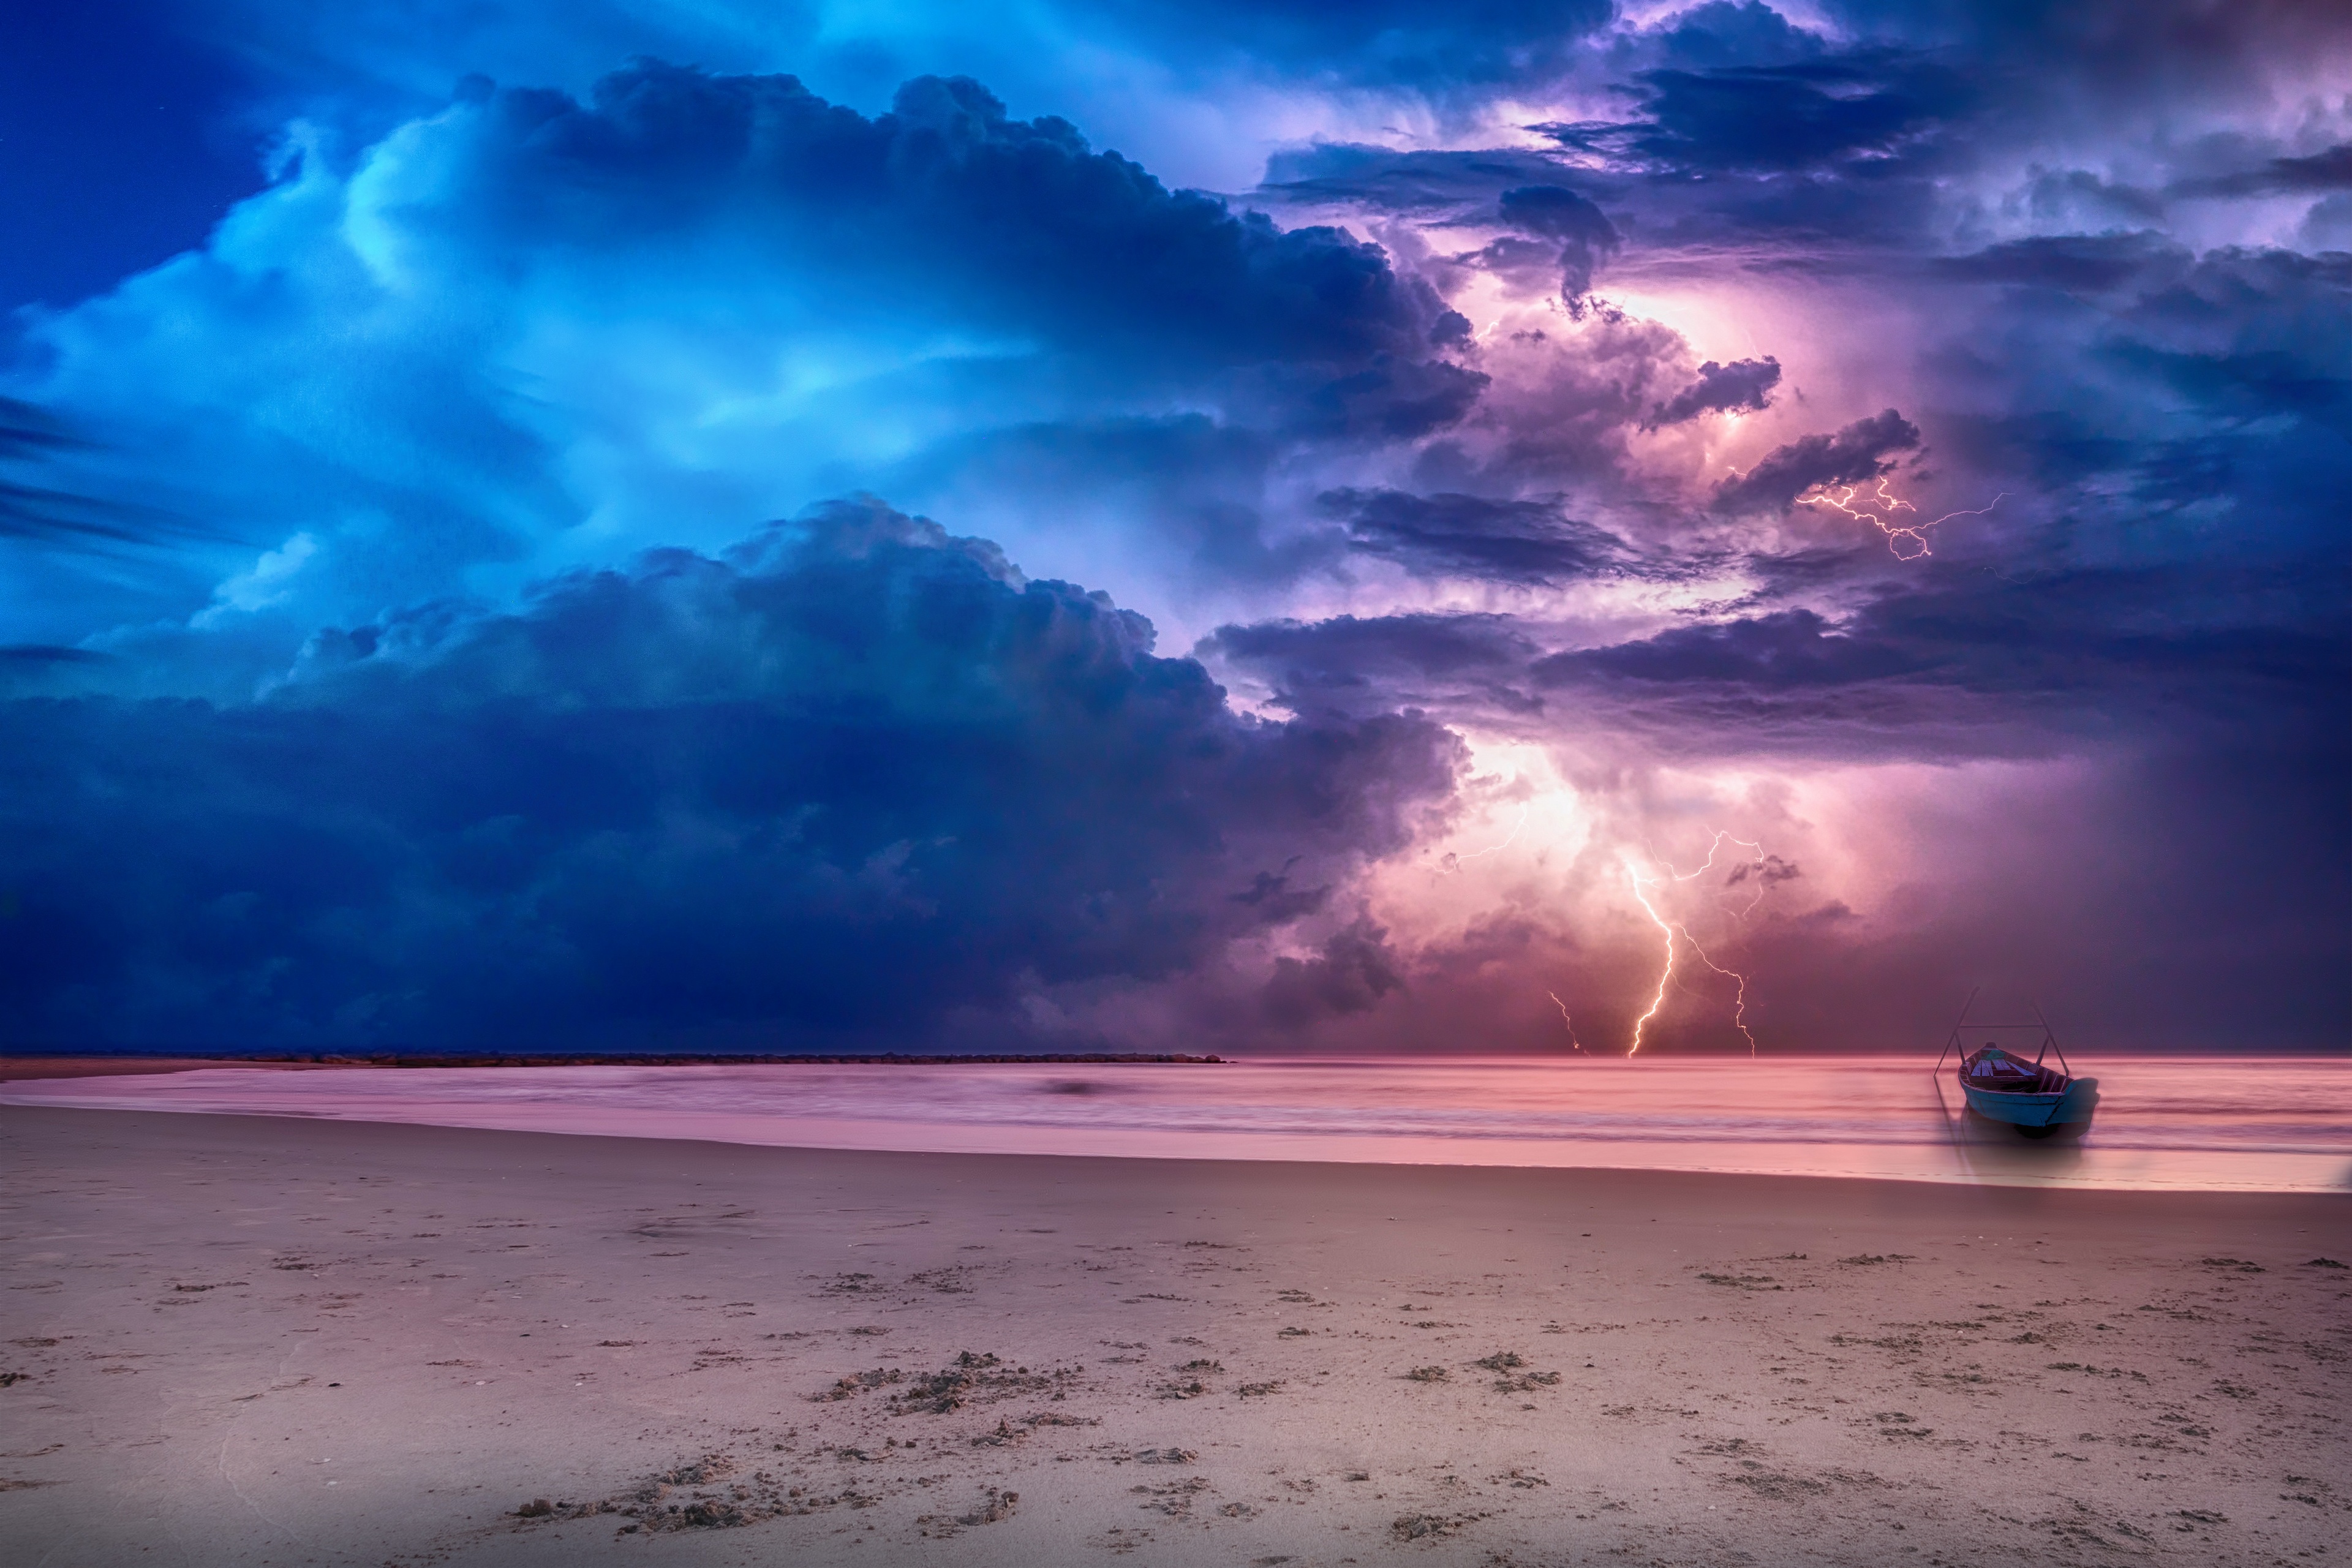 General 3840x2560 lightning nature sea beach boat sky clouds storm